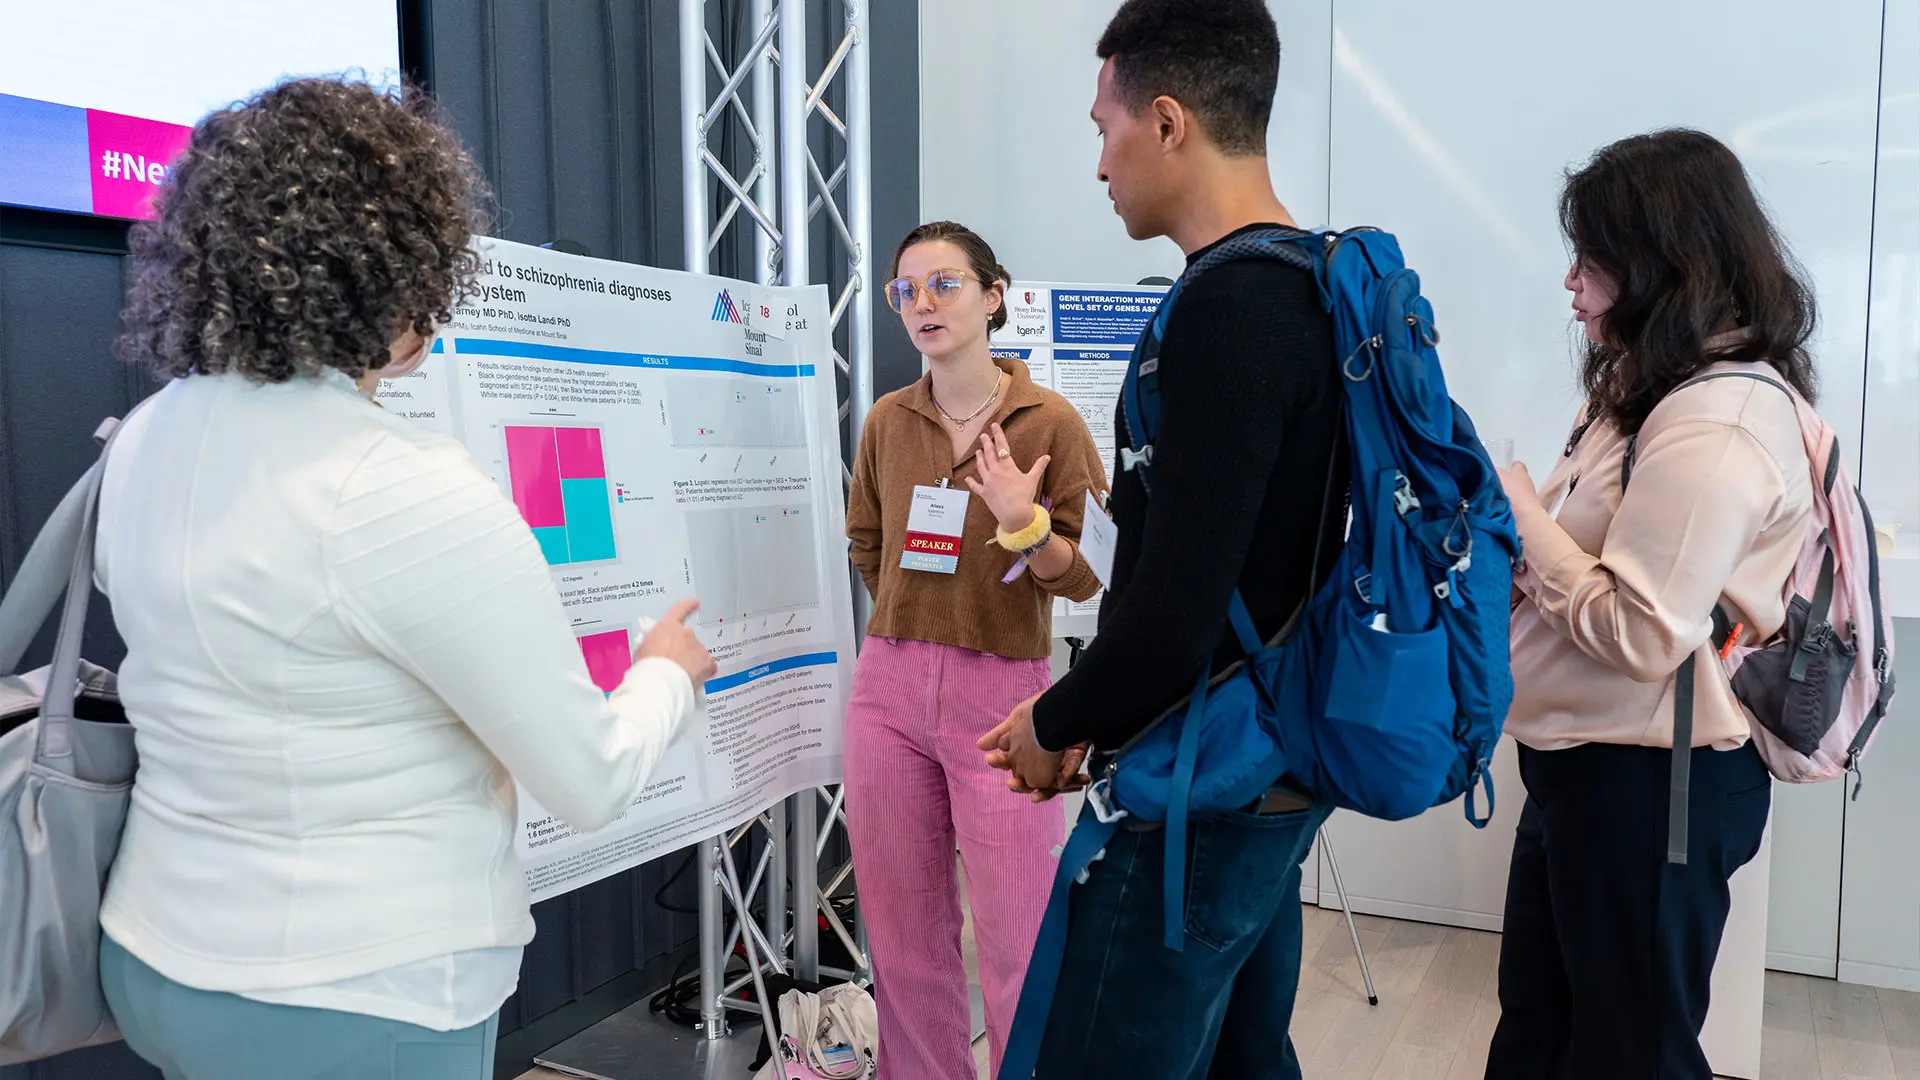 A poster presentation at "The New Wave of AI in Healthcare" inaugural symposium convened by the Windreich Department of Artificial Intelligence and Human Health and the New York Academy of Sciences.  